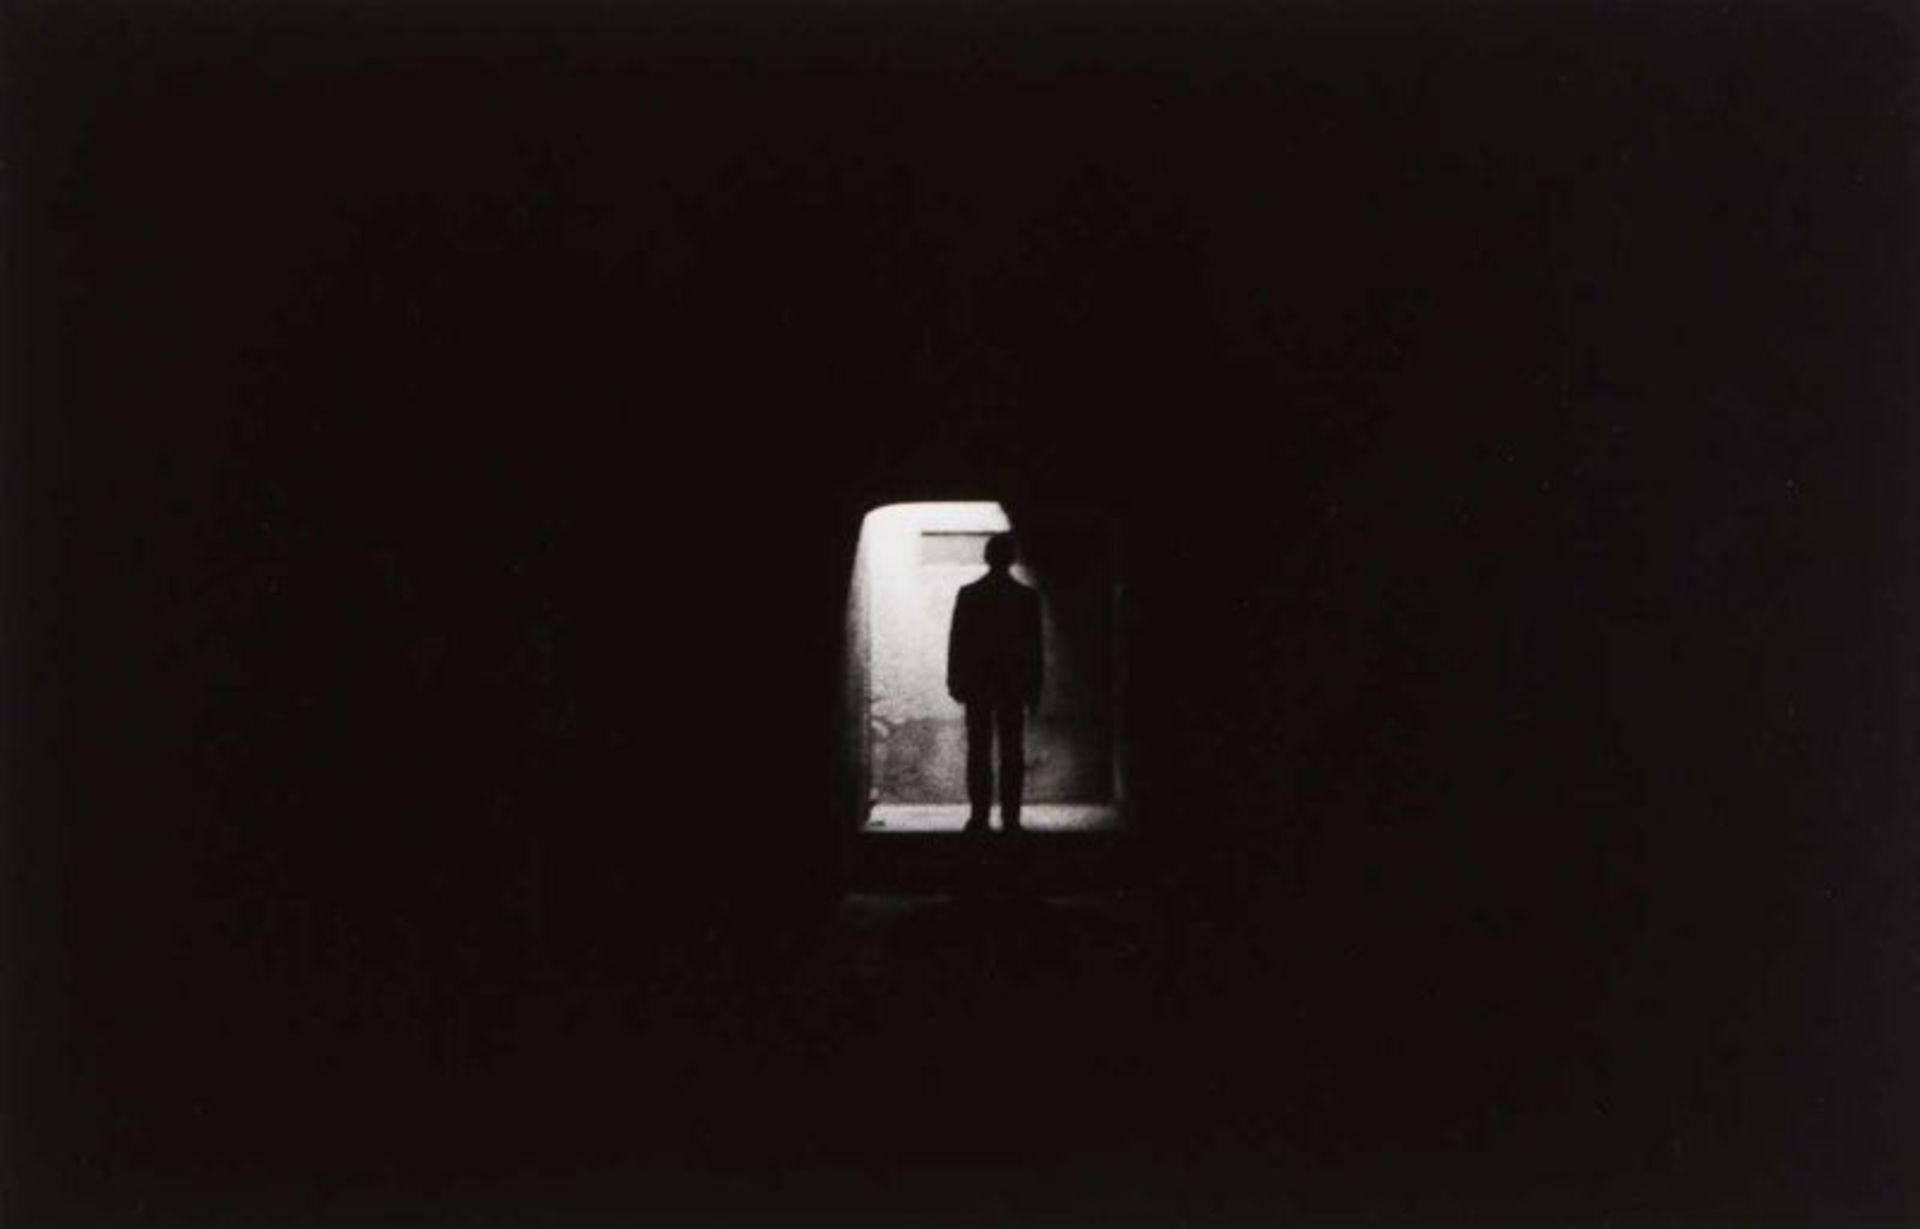 Paulo Nozolino (b.1955) Untitled From "Limbo" series Gelatine silver print Signed and numbered 2/10